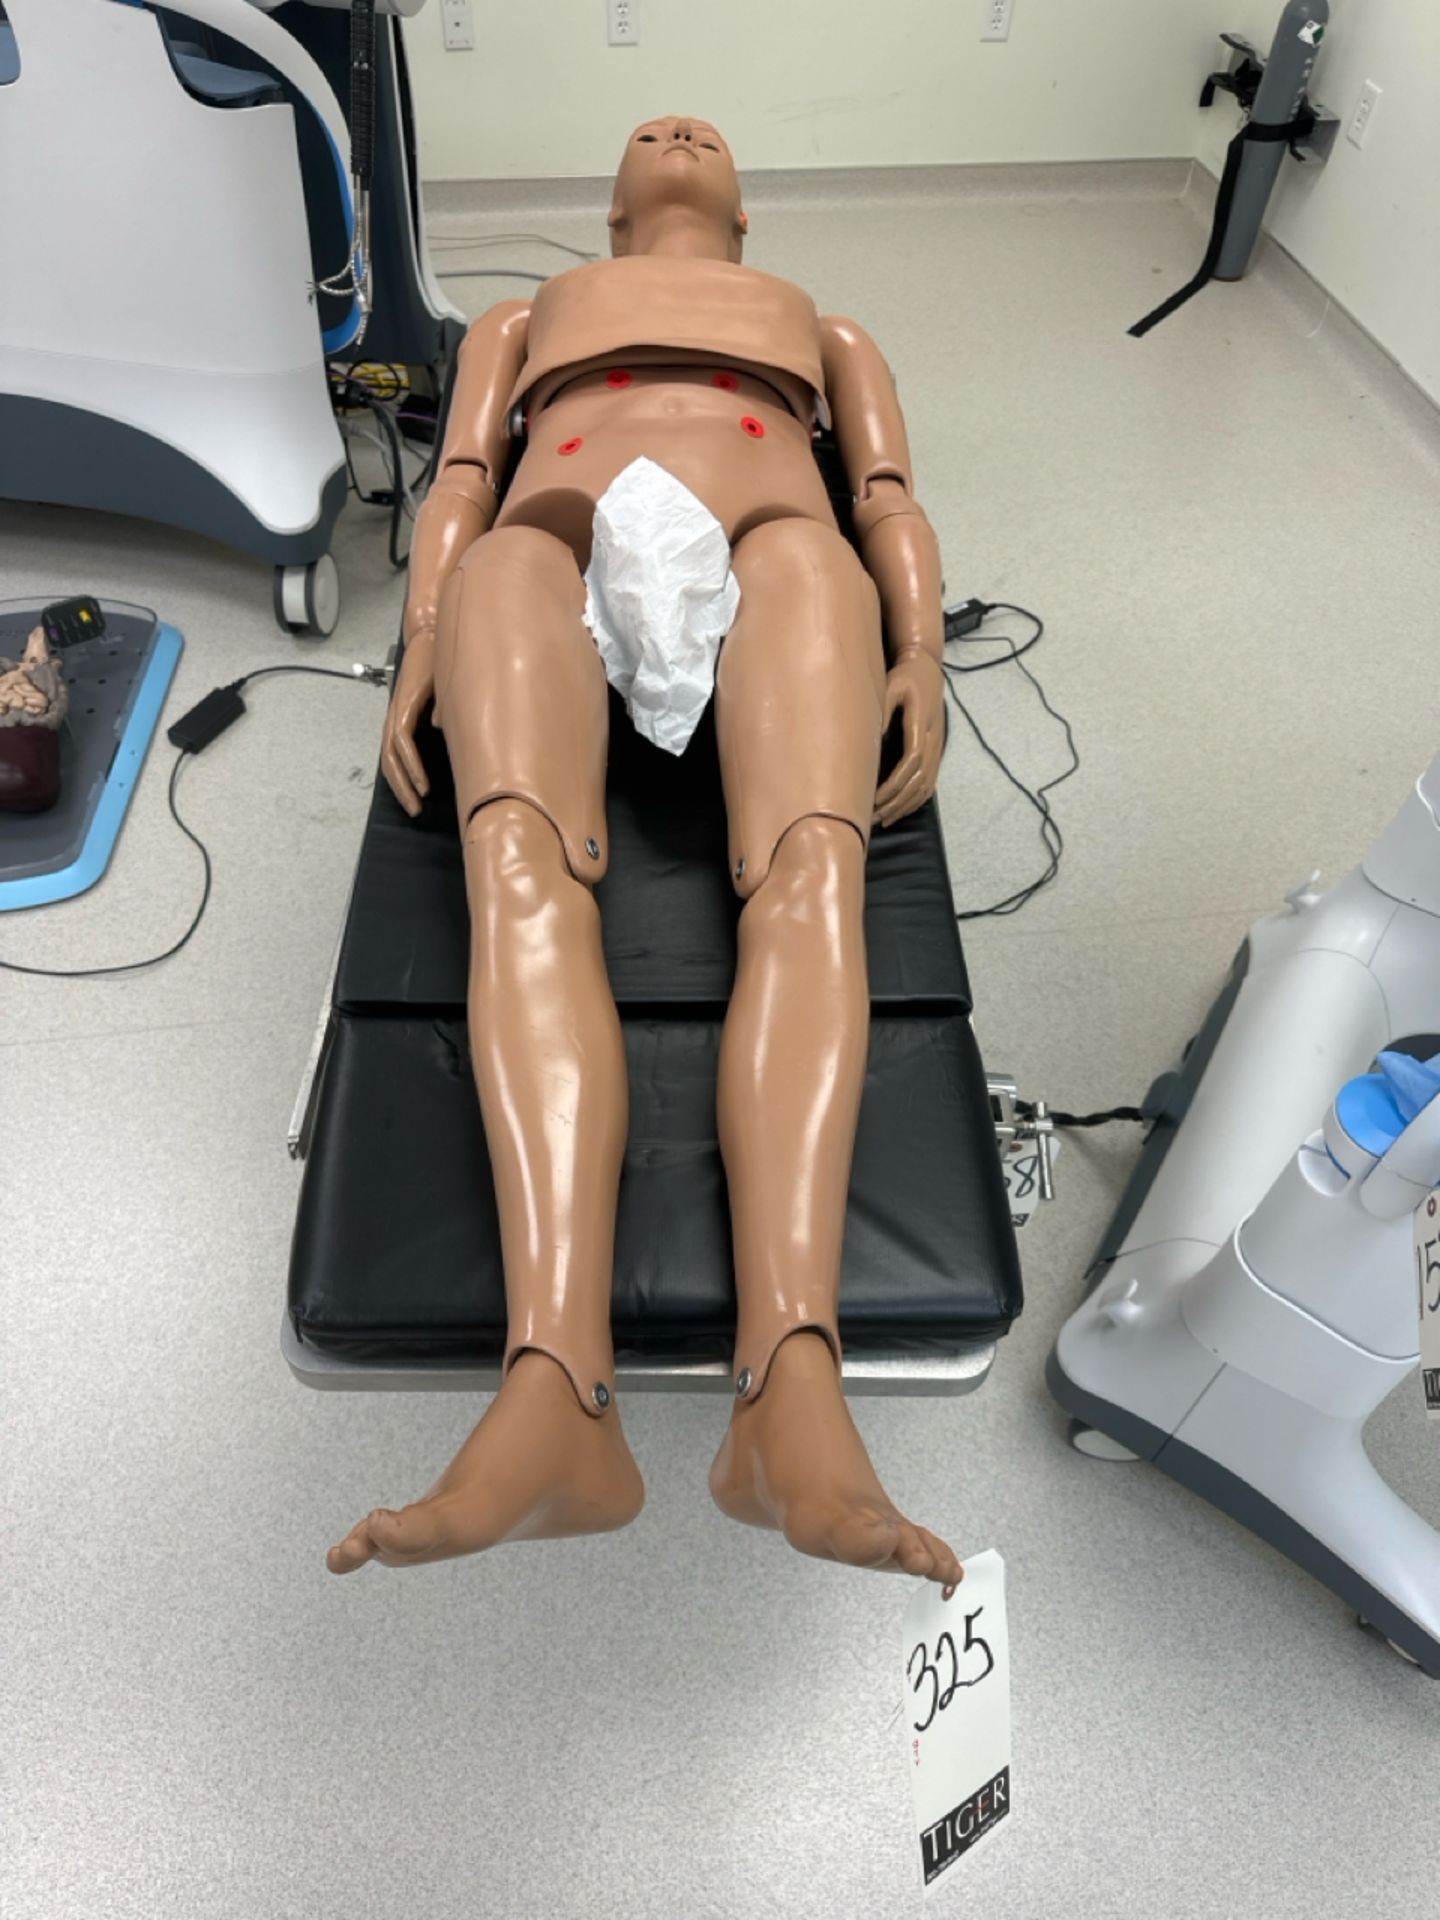 Universal Medical Human Mannequin - Image 2 of 6